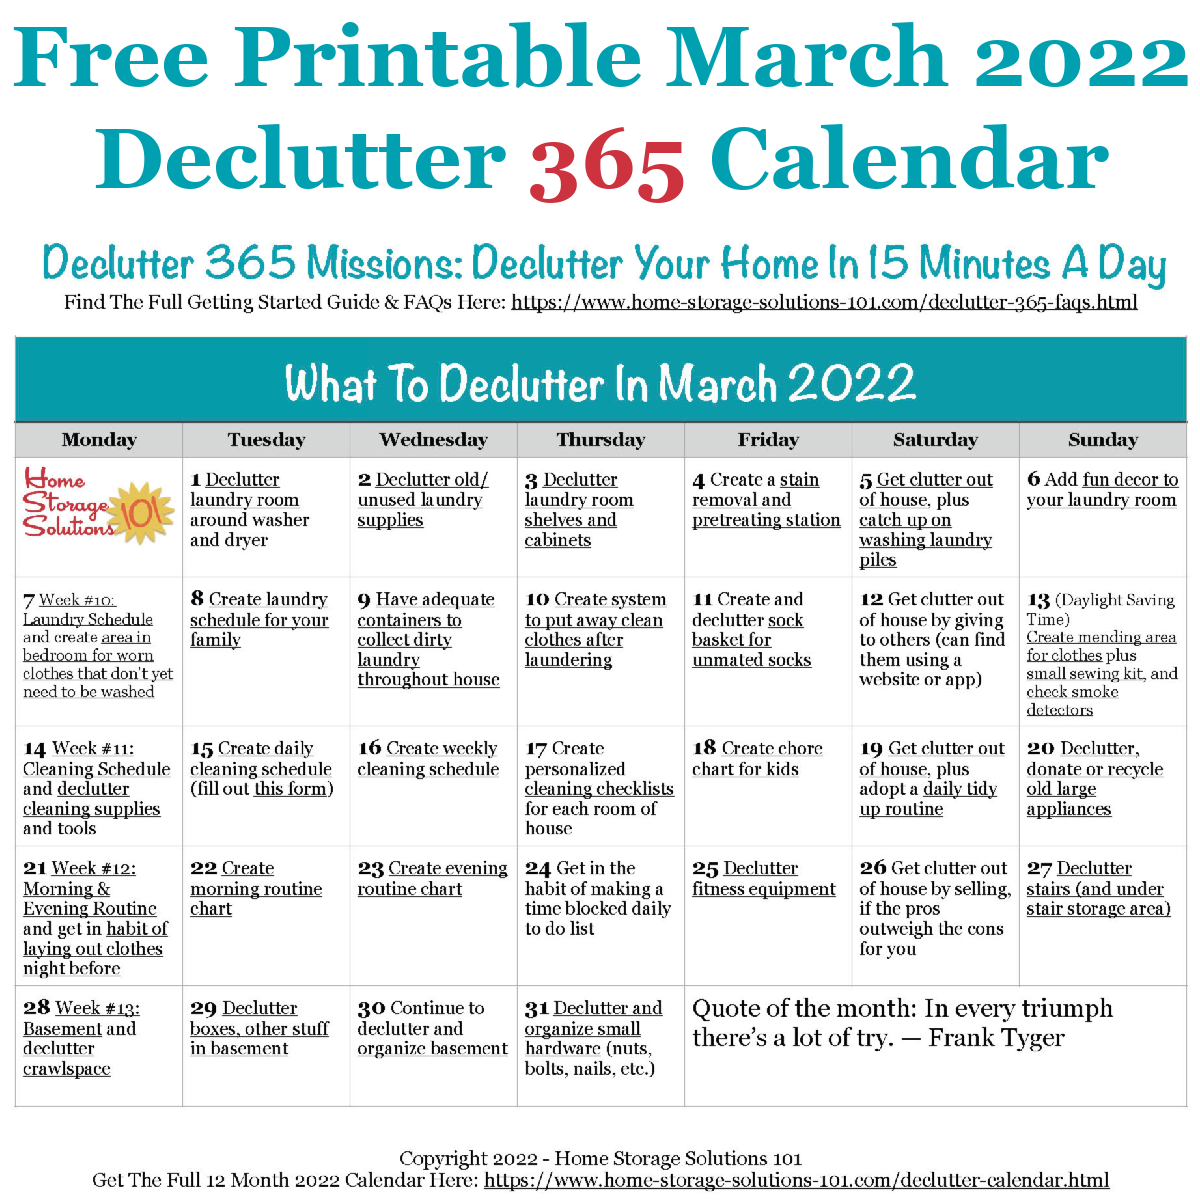 Free printable March 2022 #decluttering calendar with daily 15 minute missions. Follow the entire #Declutter365 plan provided by Home Storage Solutions 101 to #declutter your whole house in a year.